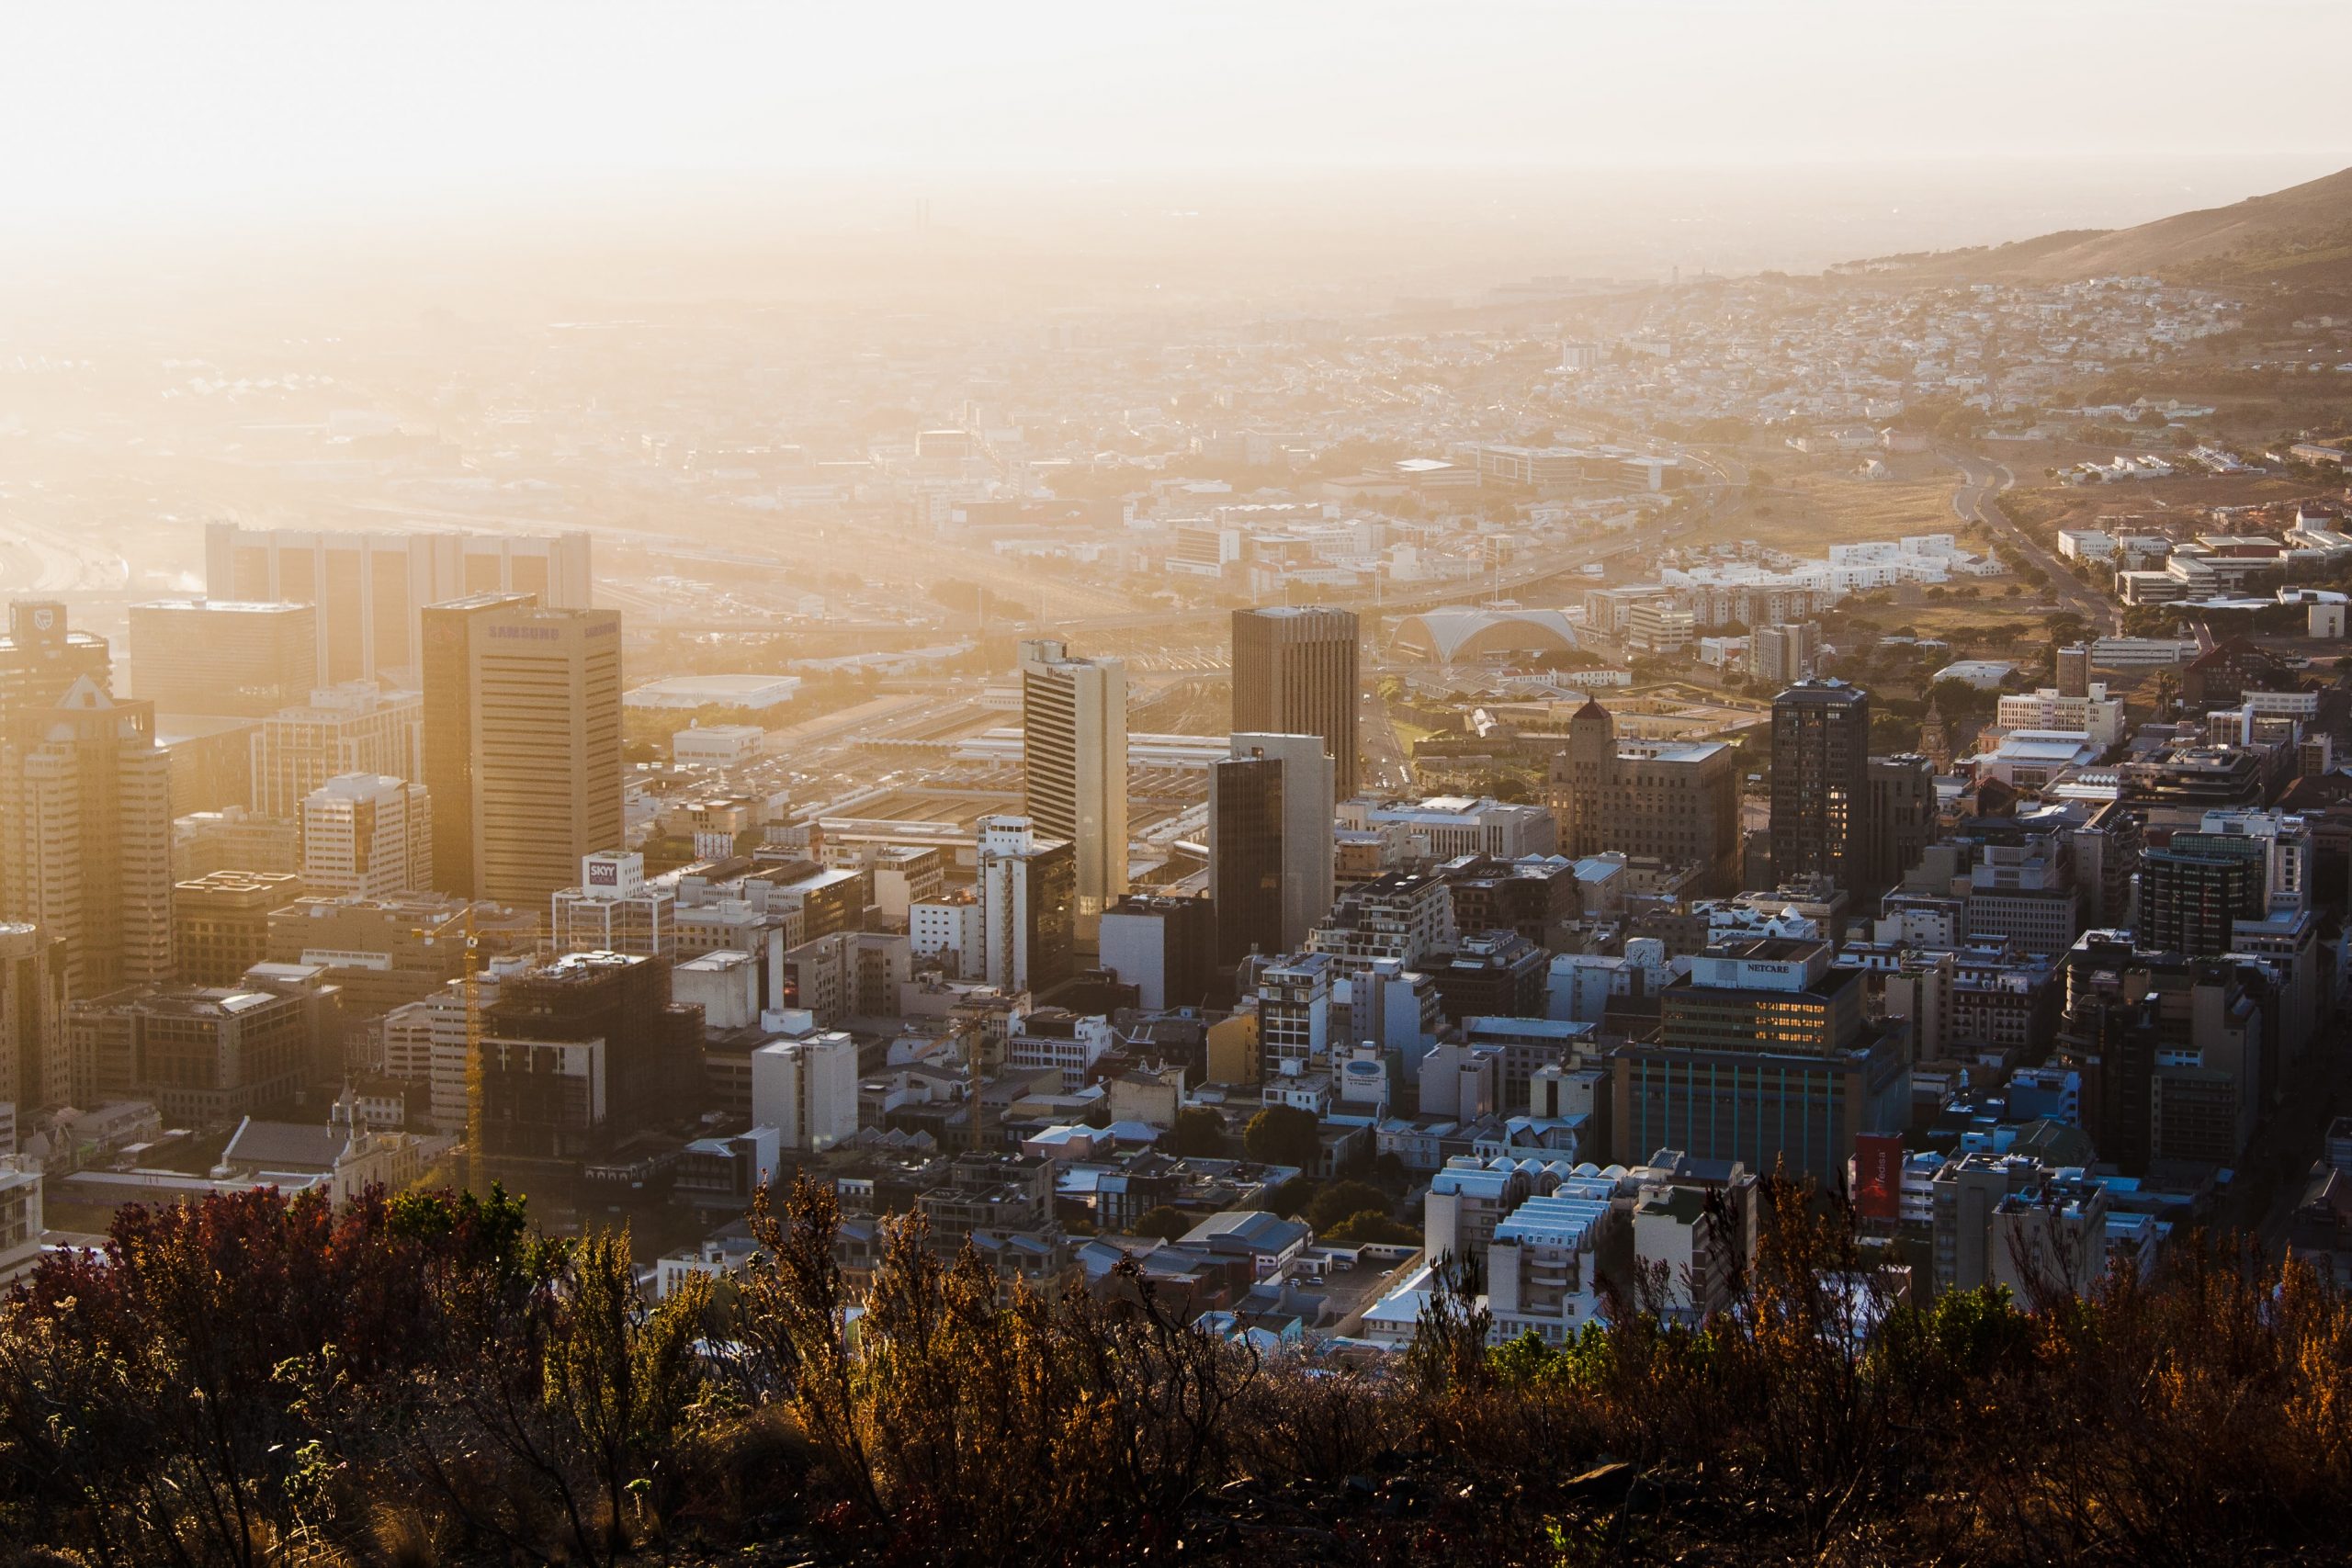 Cape Town, South Africa at Sunrise